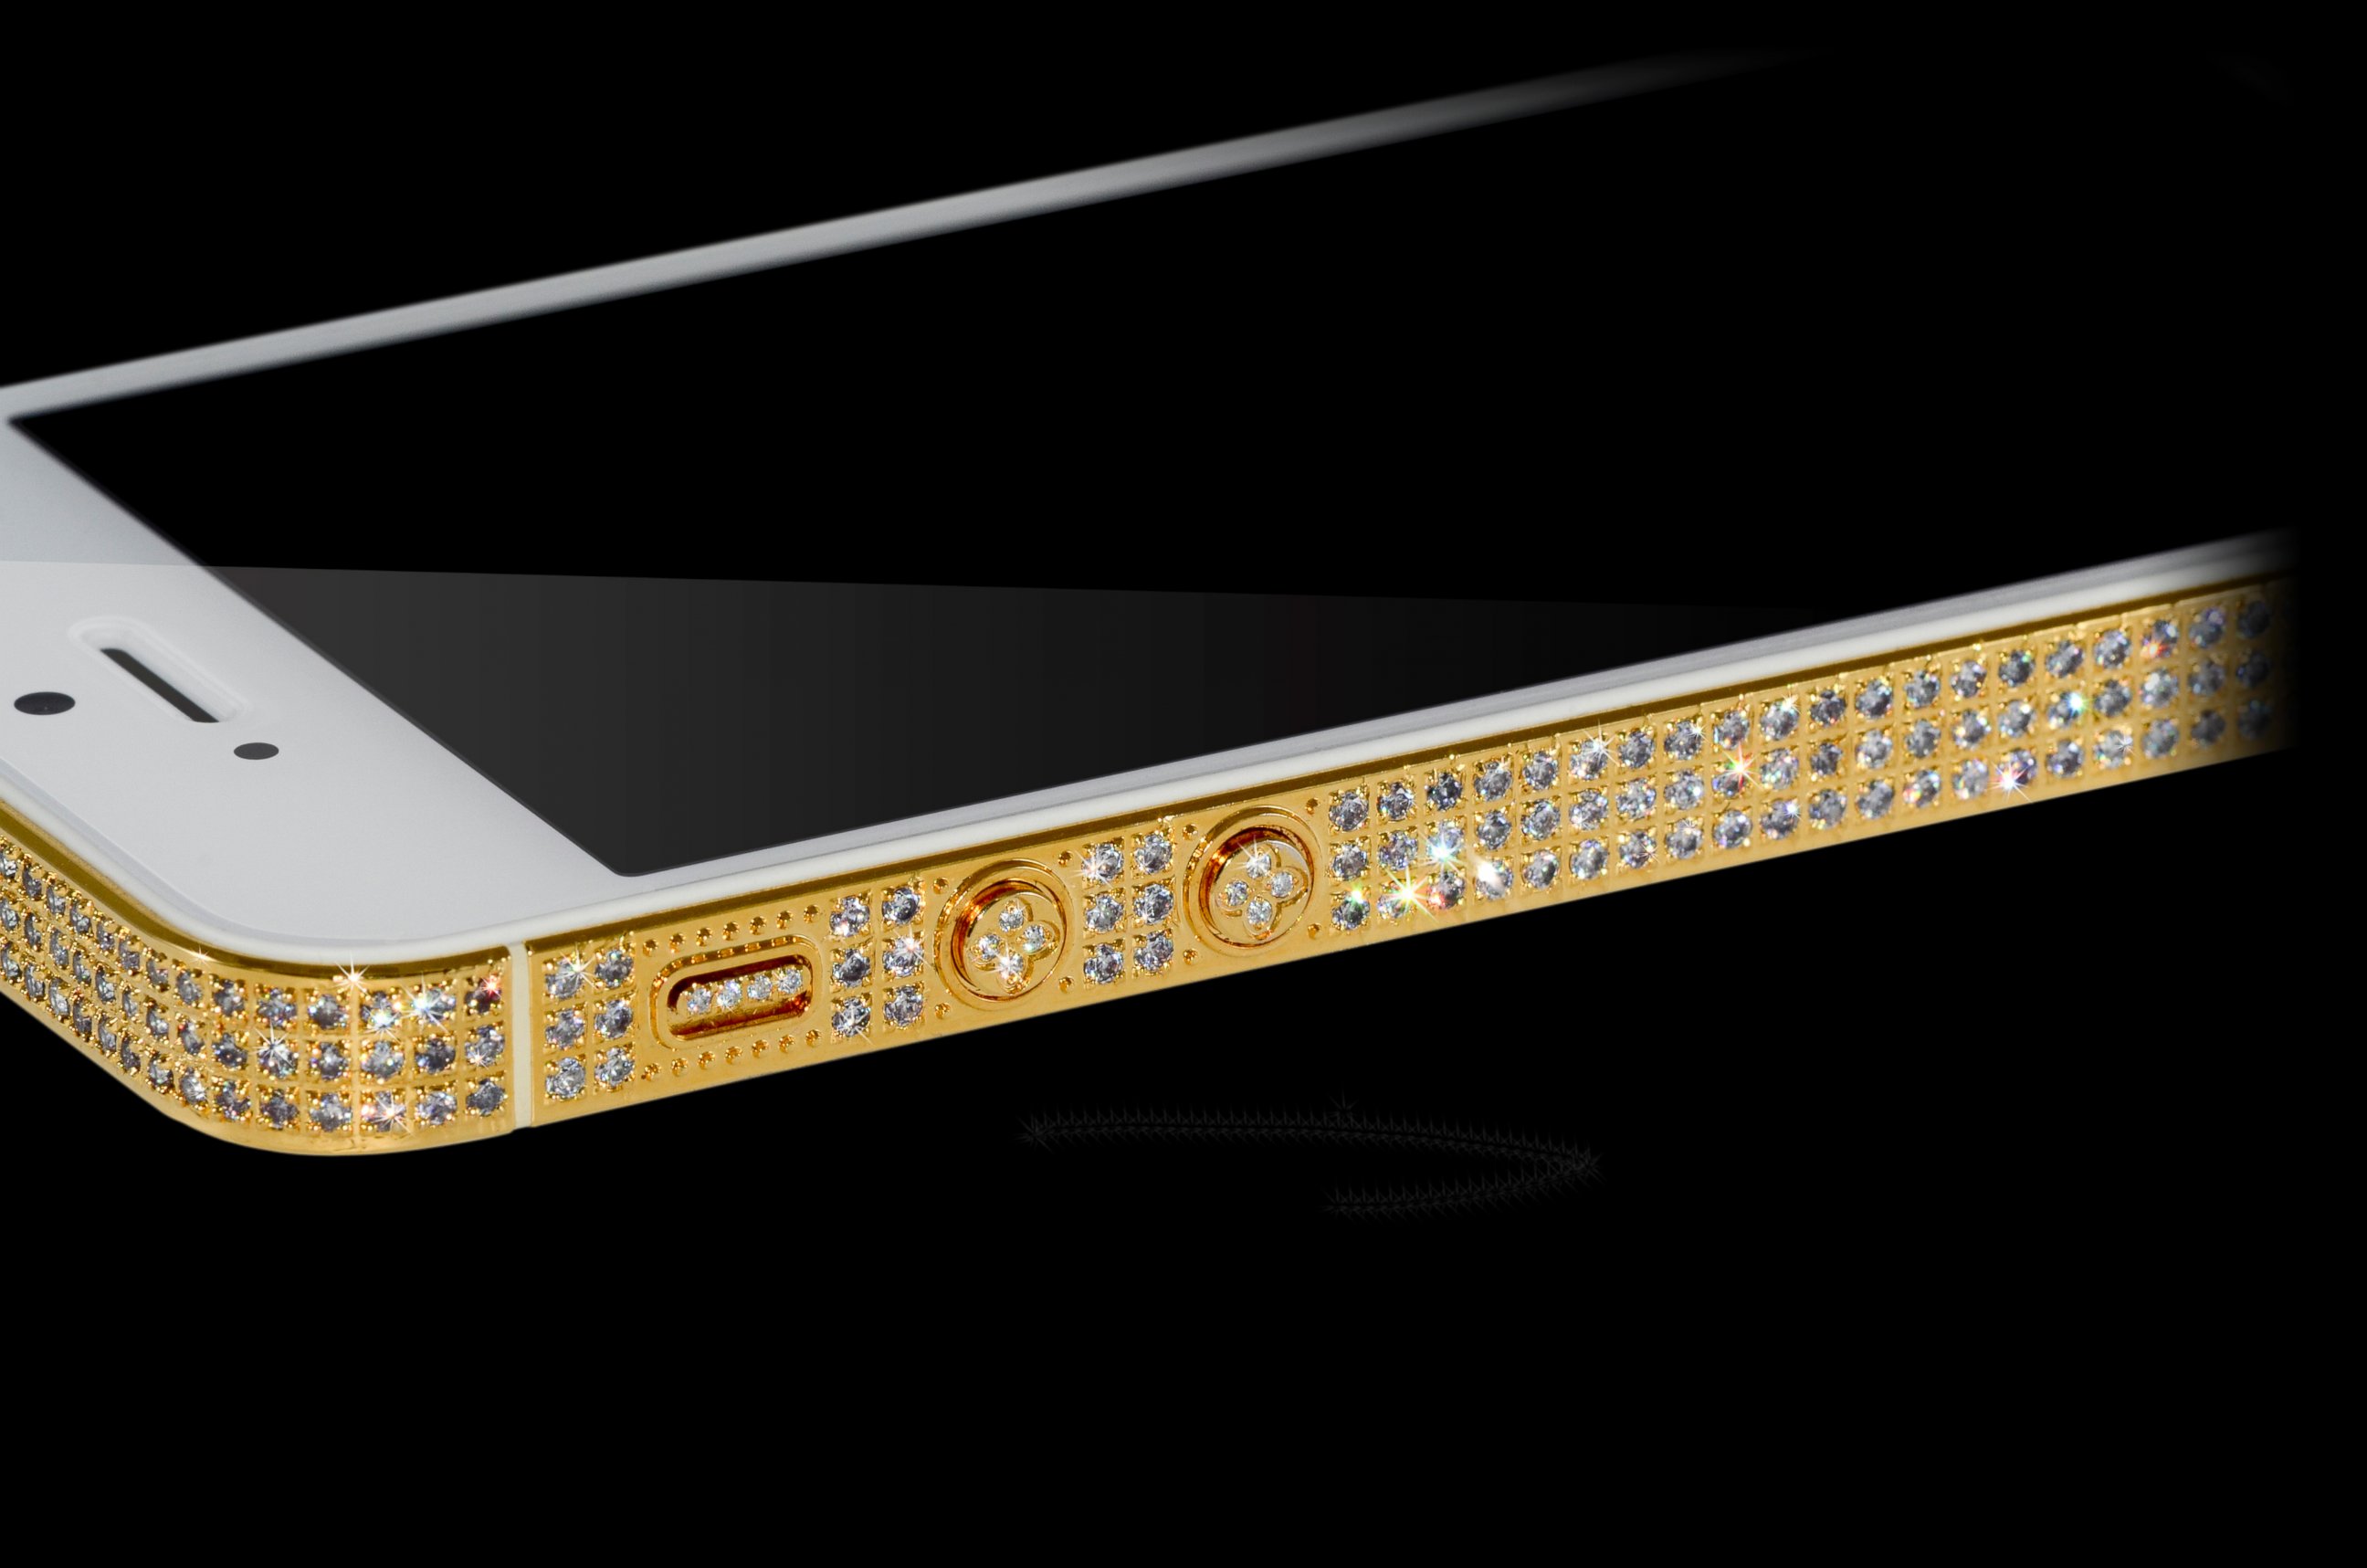 PHOTO: This $1 million iPhone 5 is available from Alchemist London. There are only two in the world for sale.